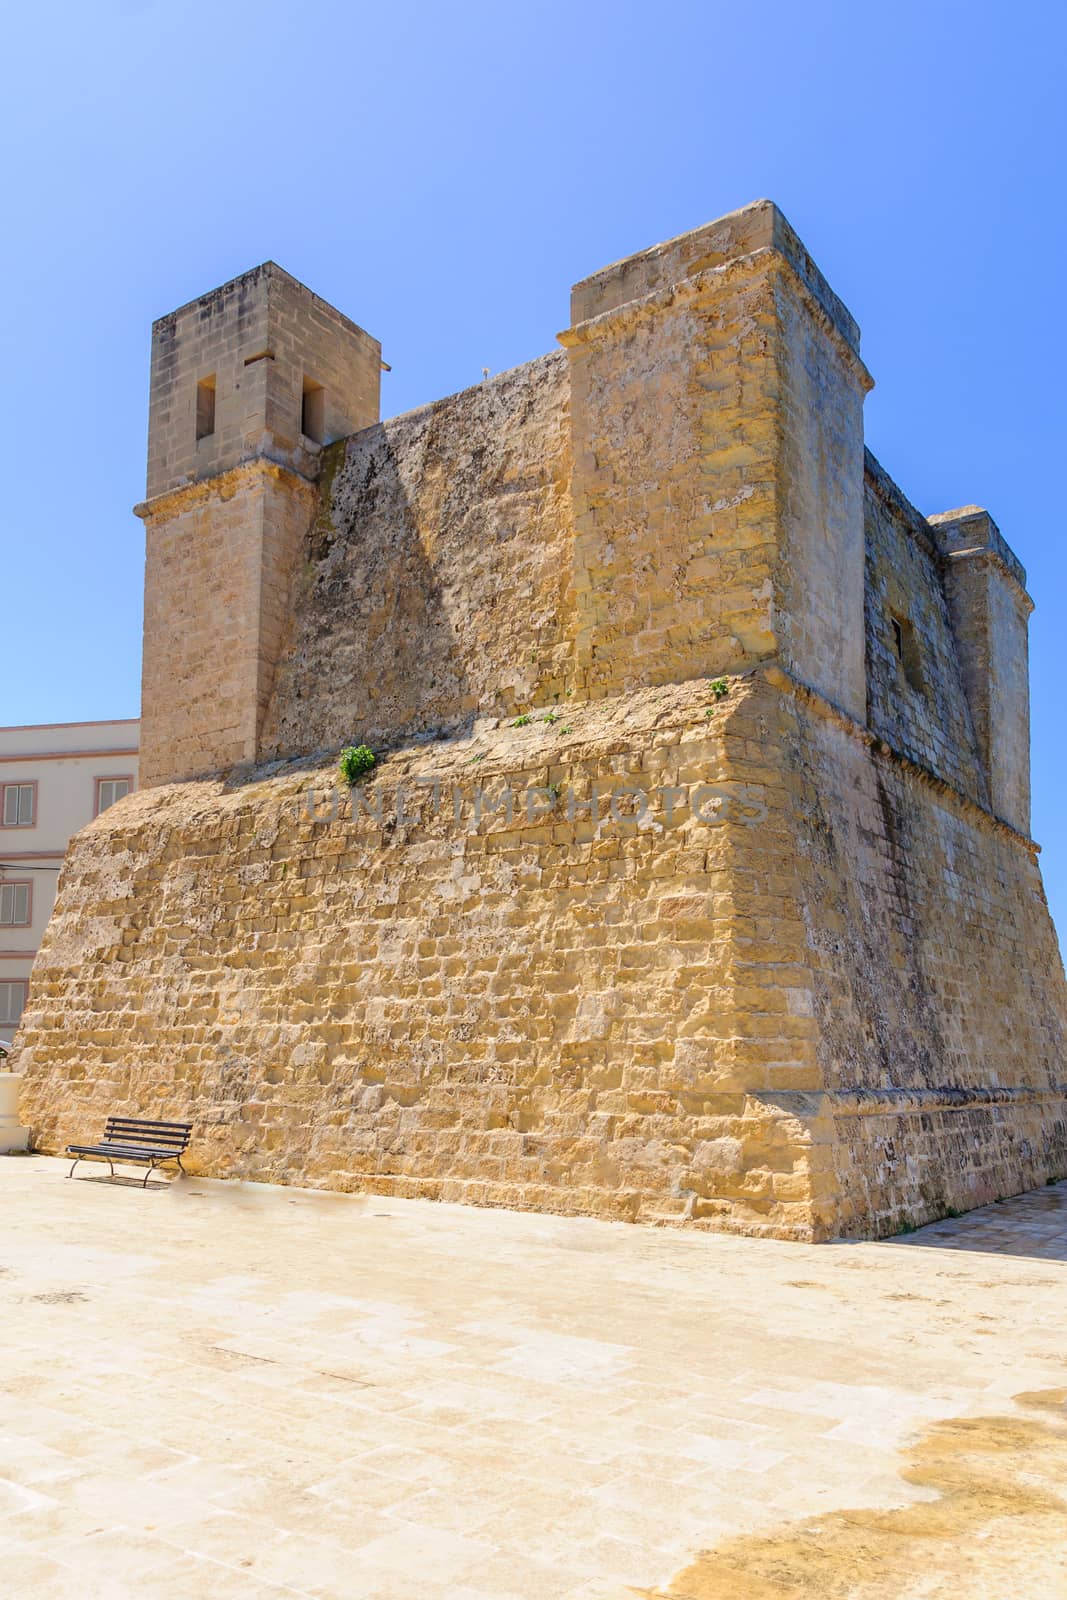 View of an old fort building (Wignacourt Tower), in Qawra, St. Pauls Bay, Malta